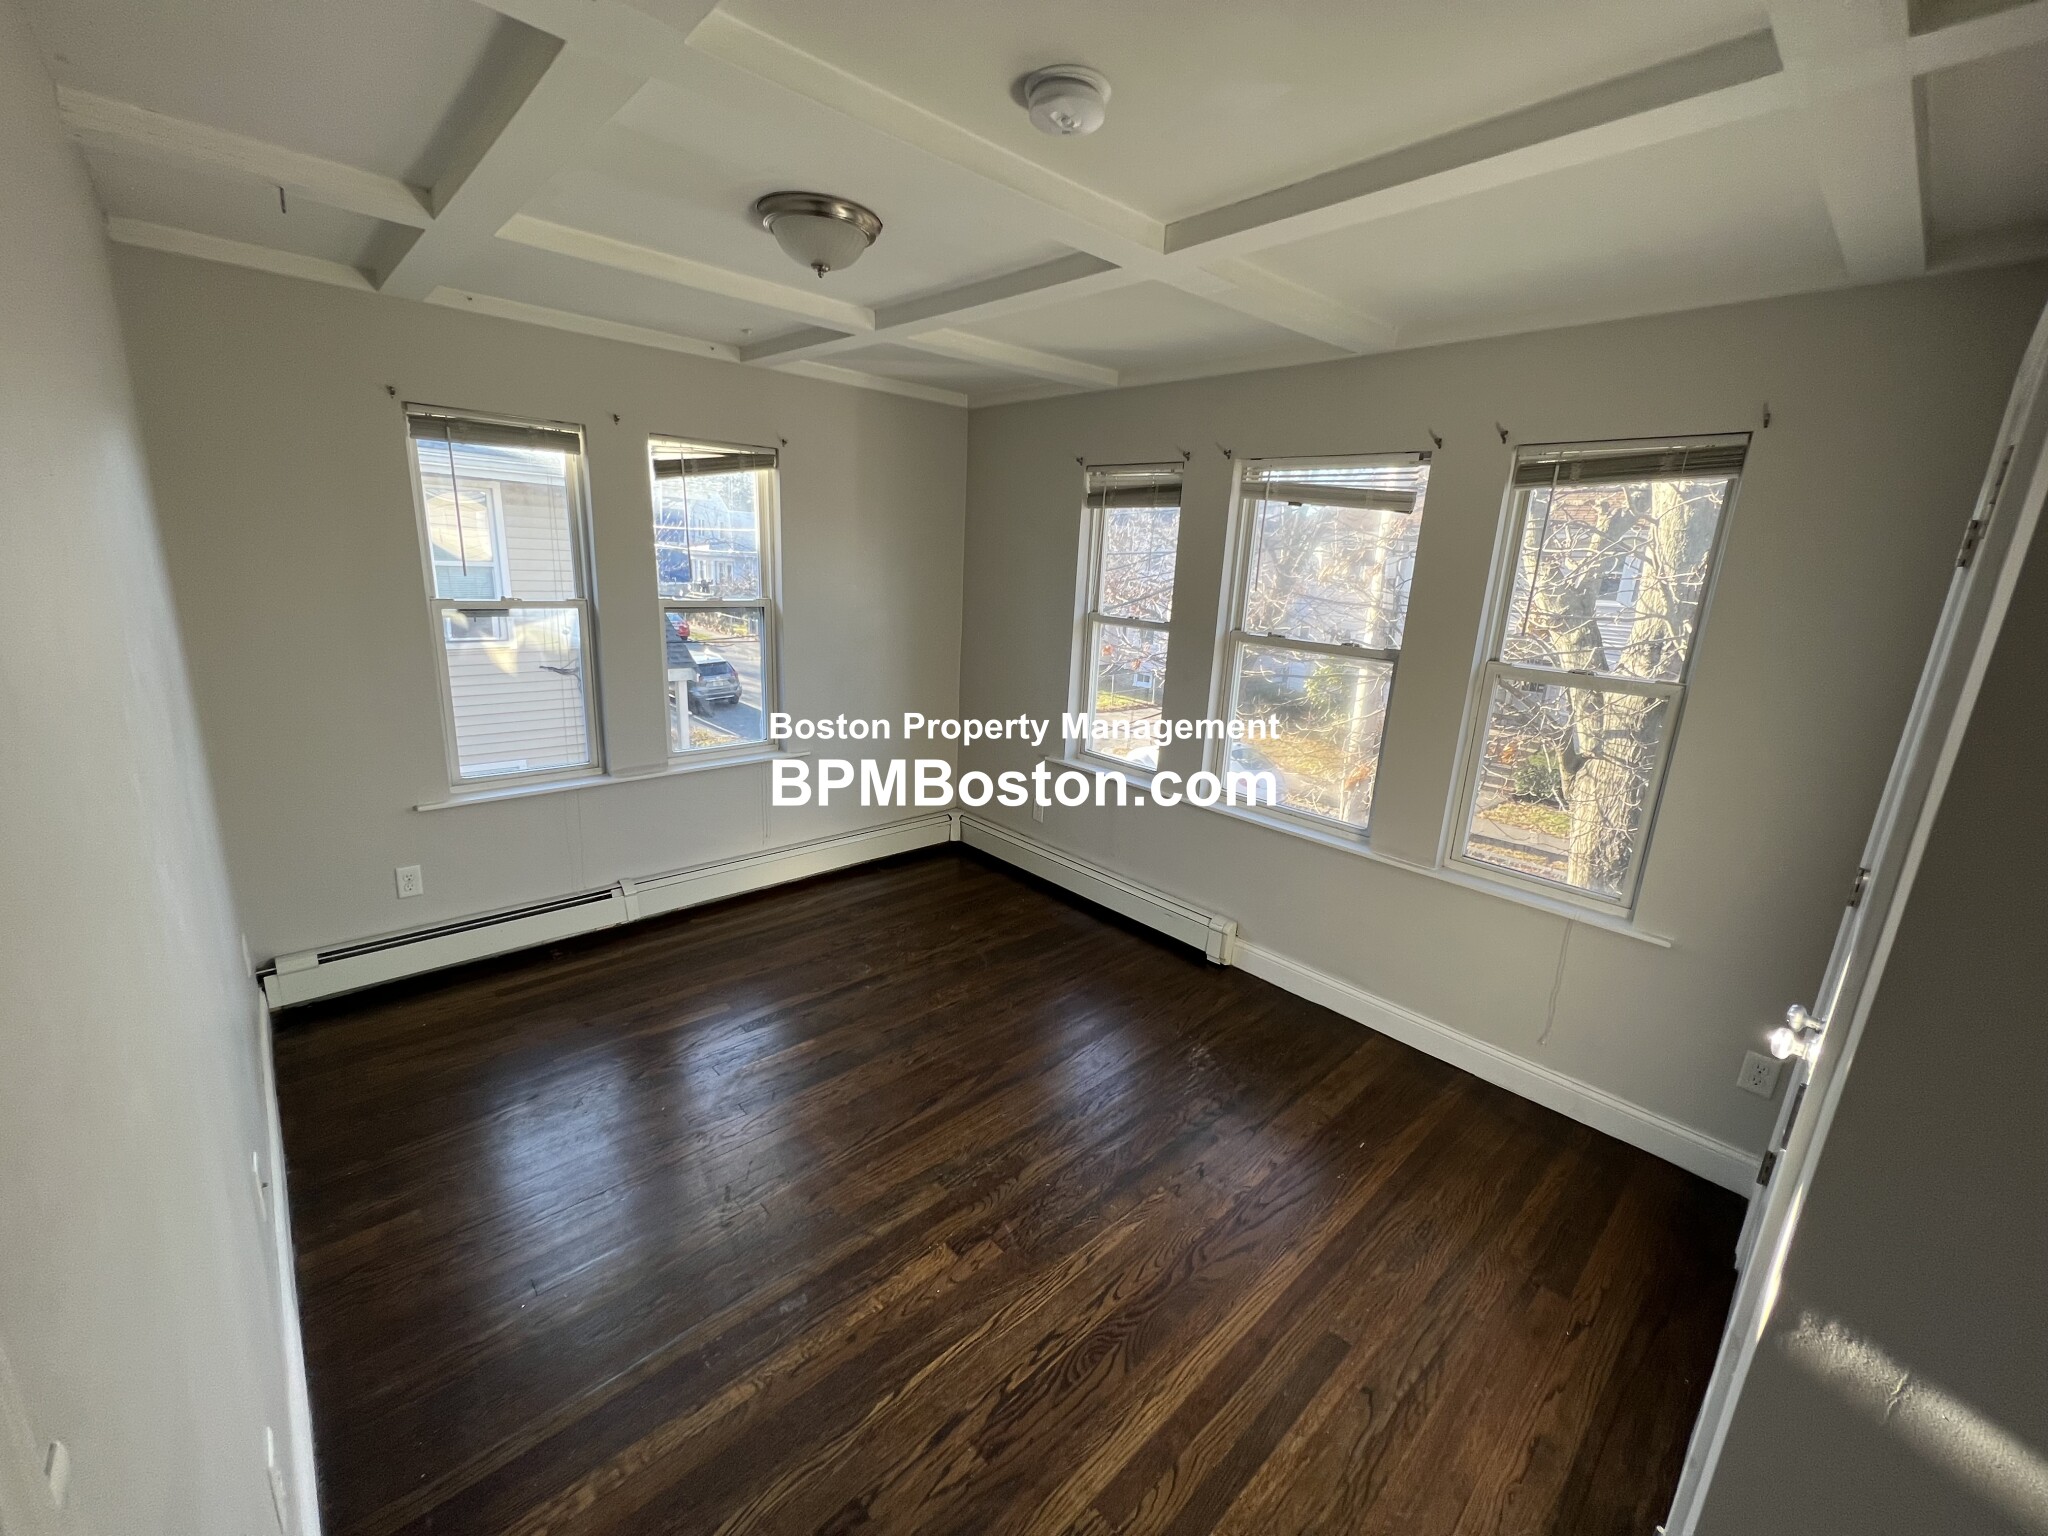 Photos of apartment on Safford,Quincy MA 02169